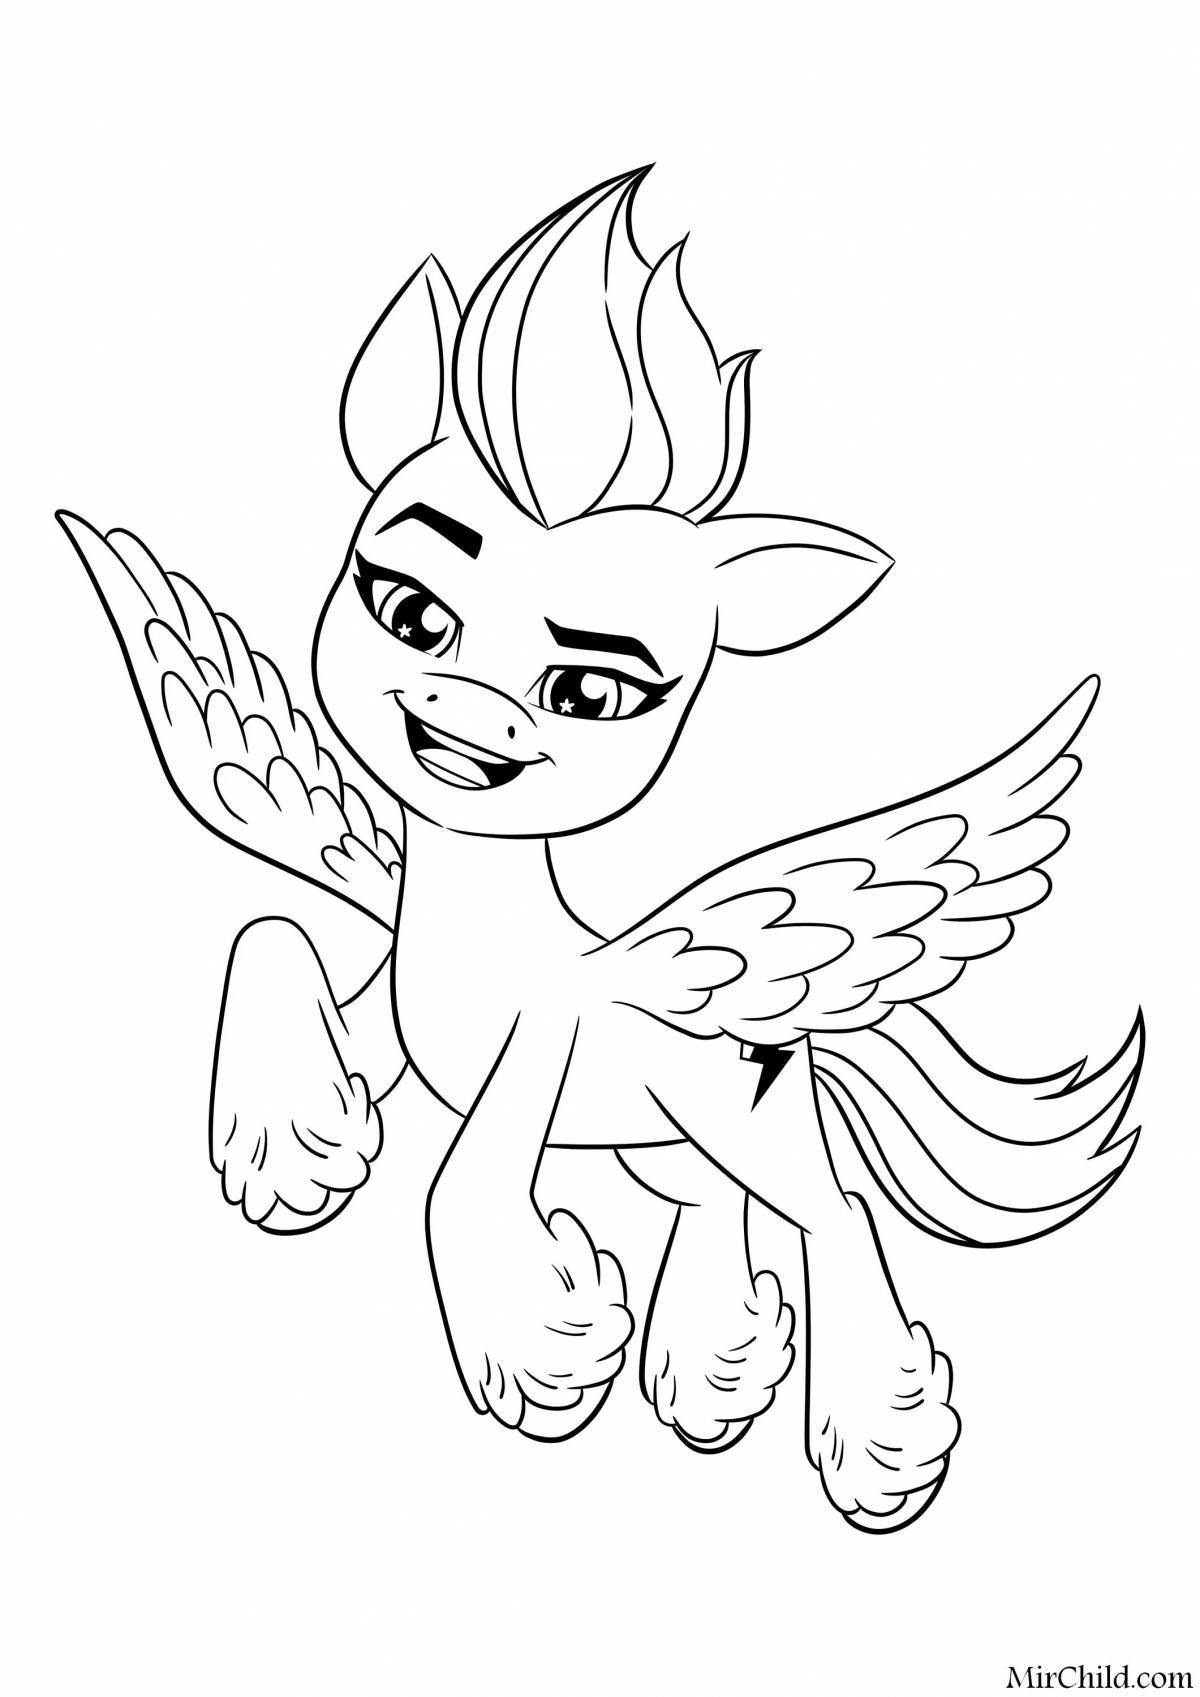 New generation fabulous little pony coloring book